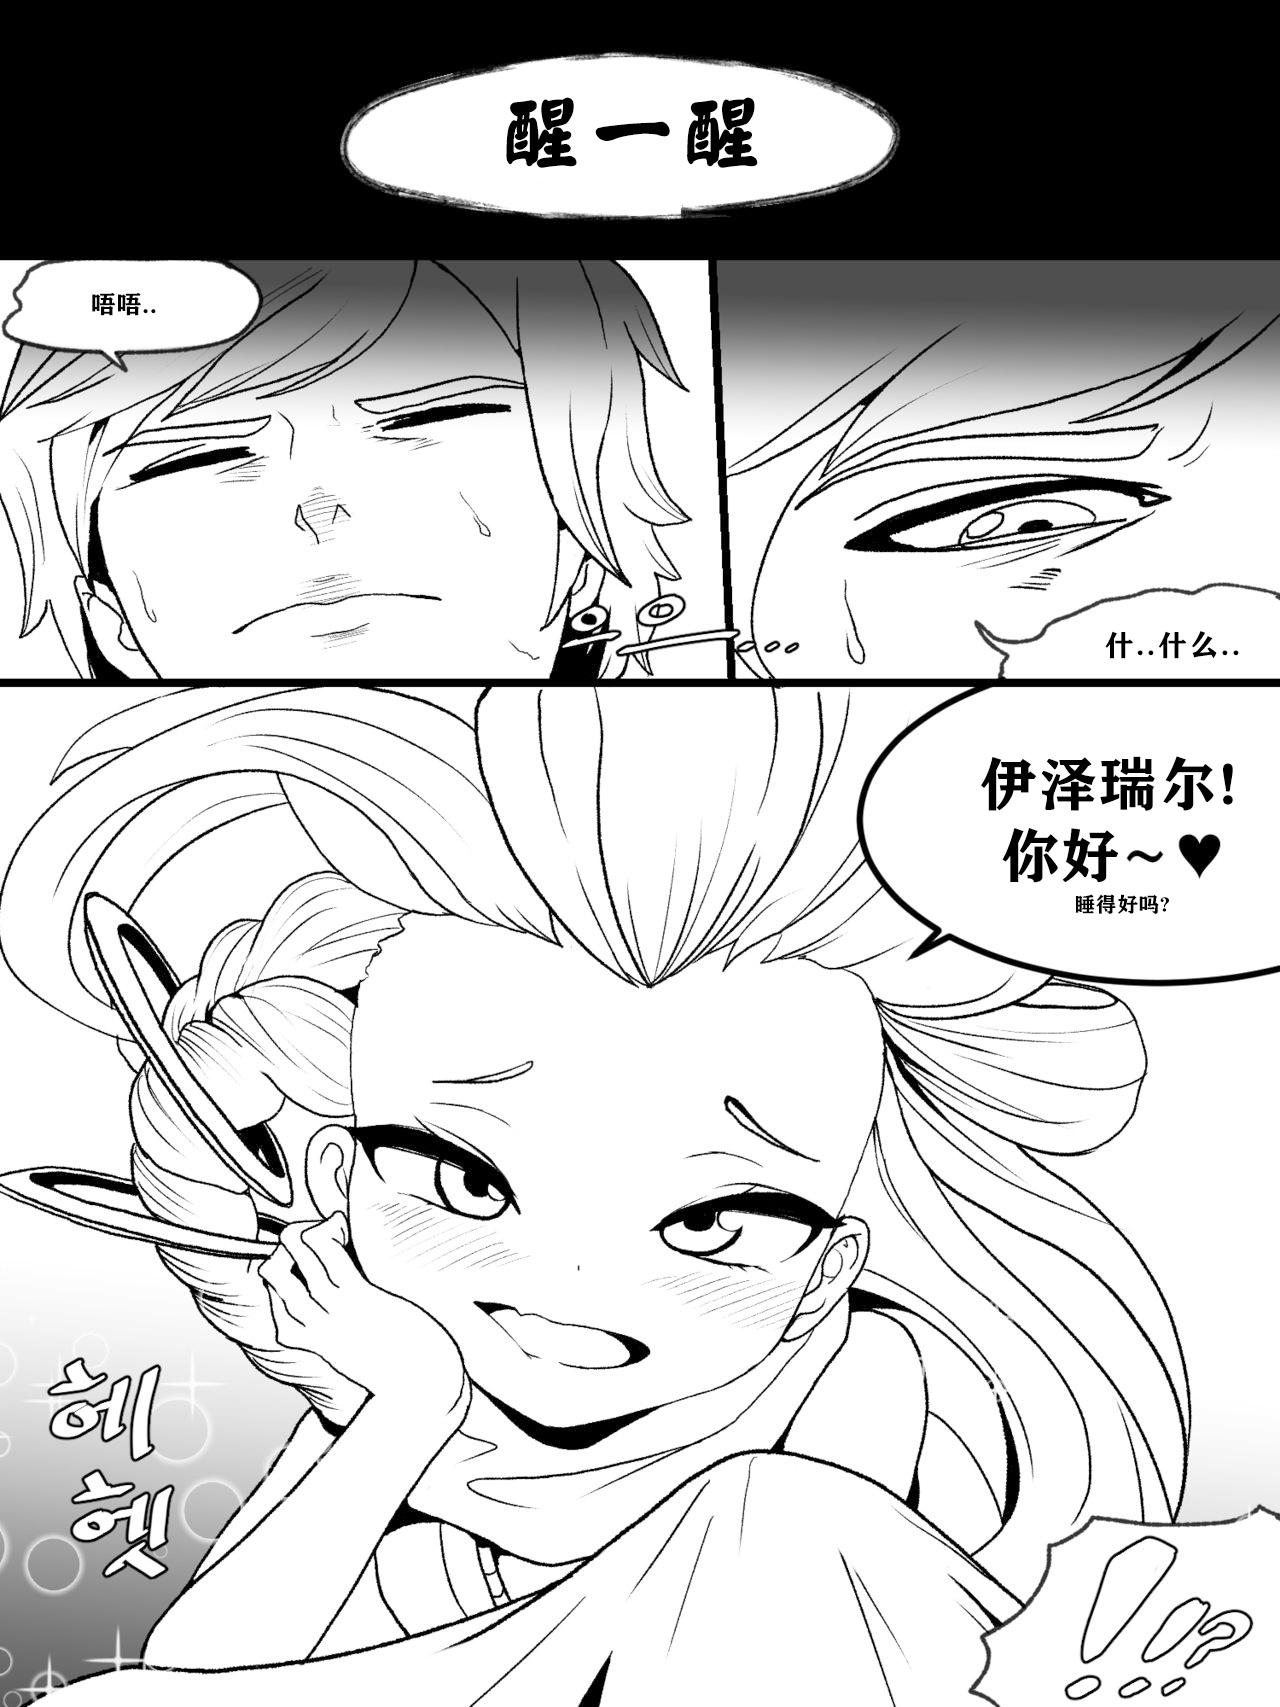 Hardcore The reality in the starlight | 星光中的真实 - League of legends Amateur Porn - Page 4